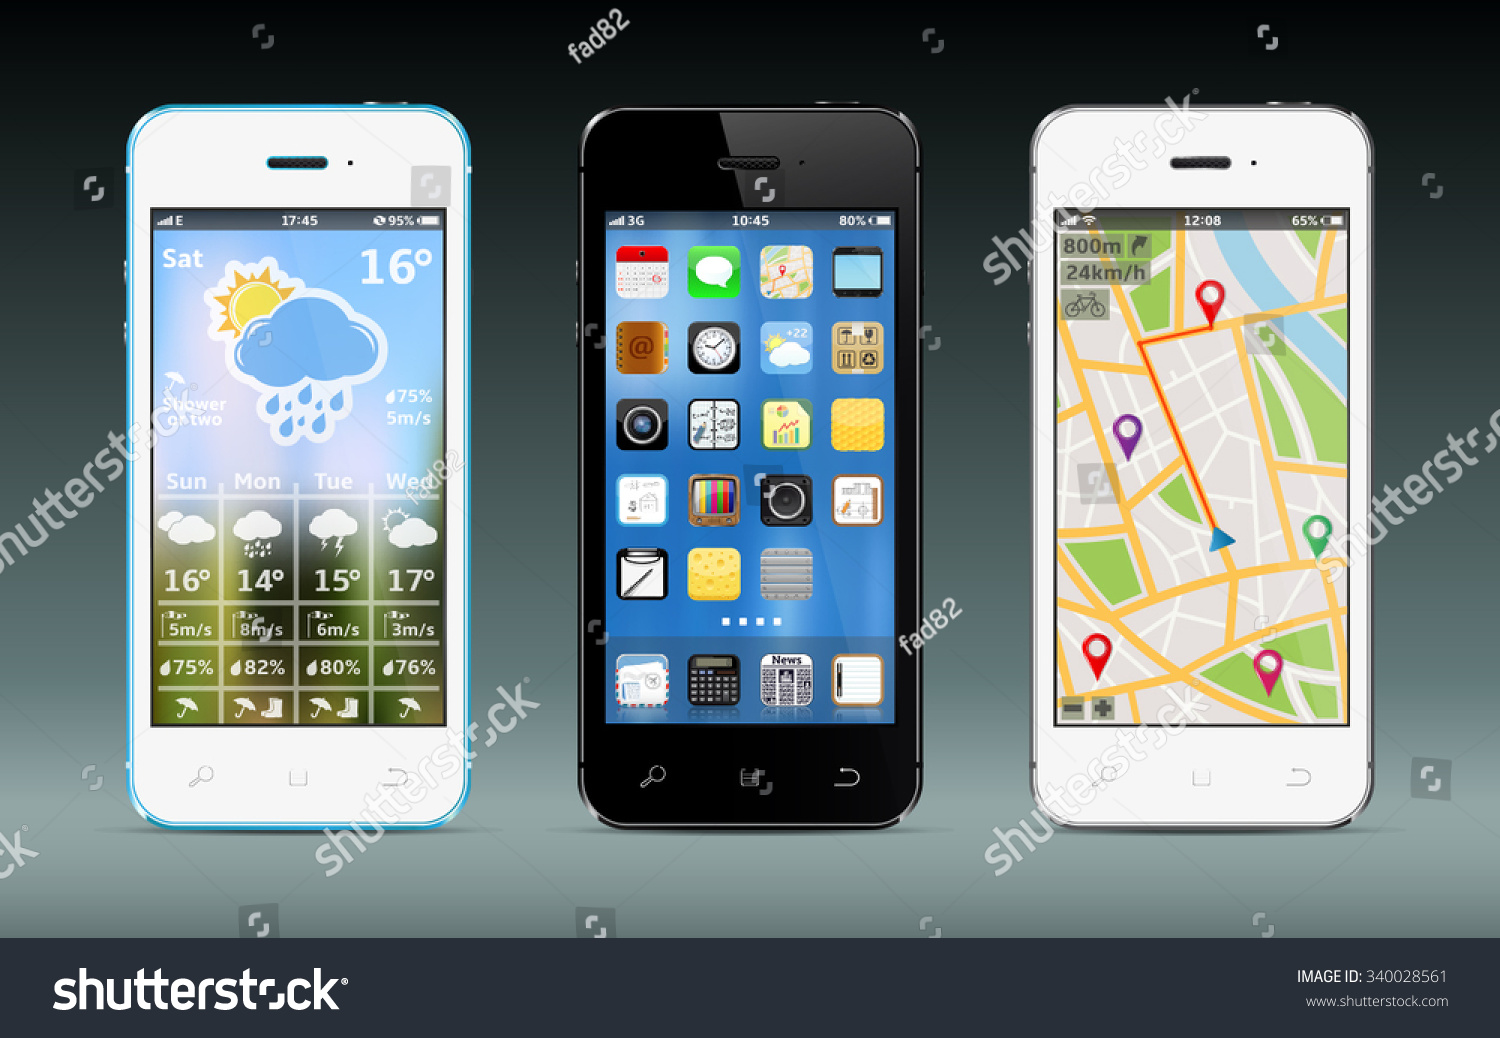 Smart phones with app icons, weather and GPS navigation widgets #340028561